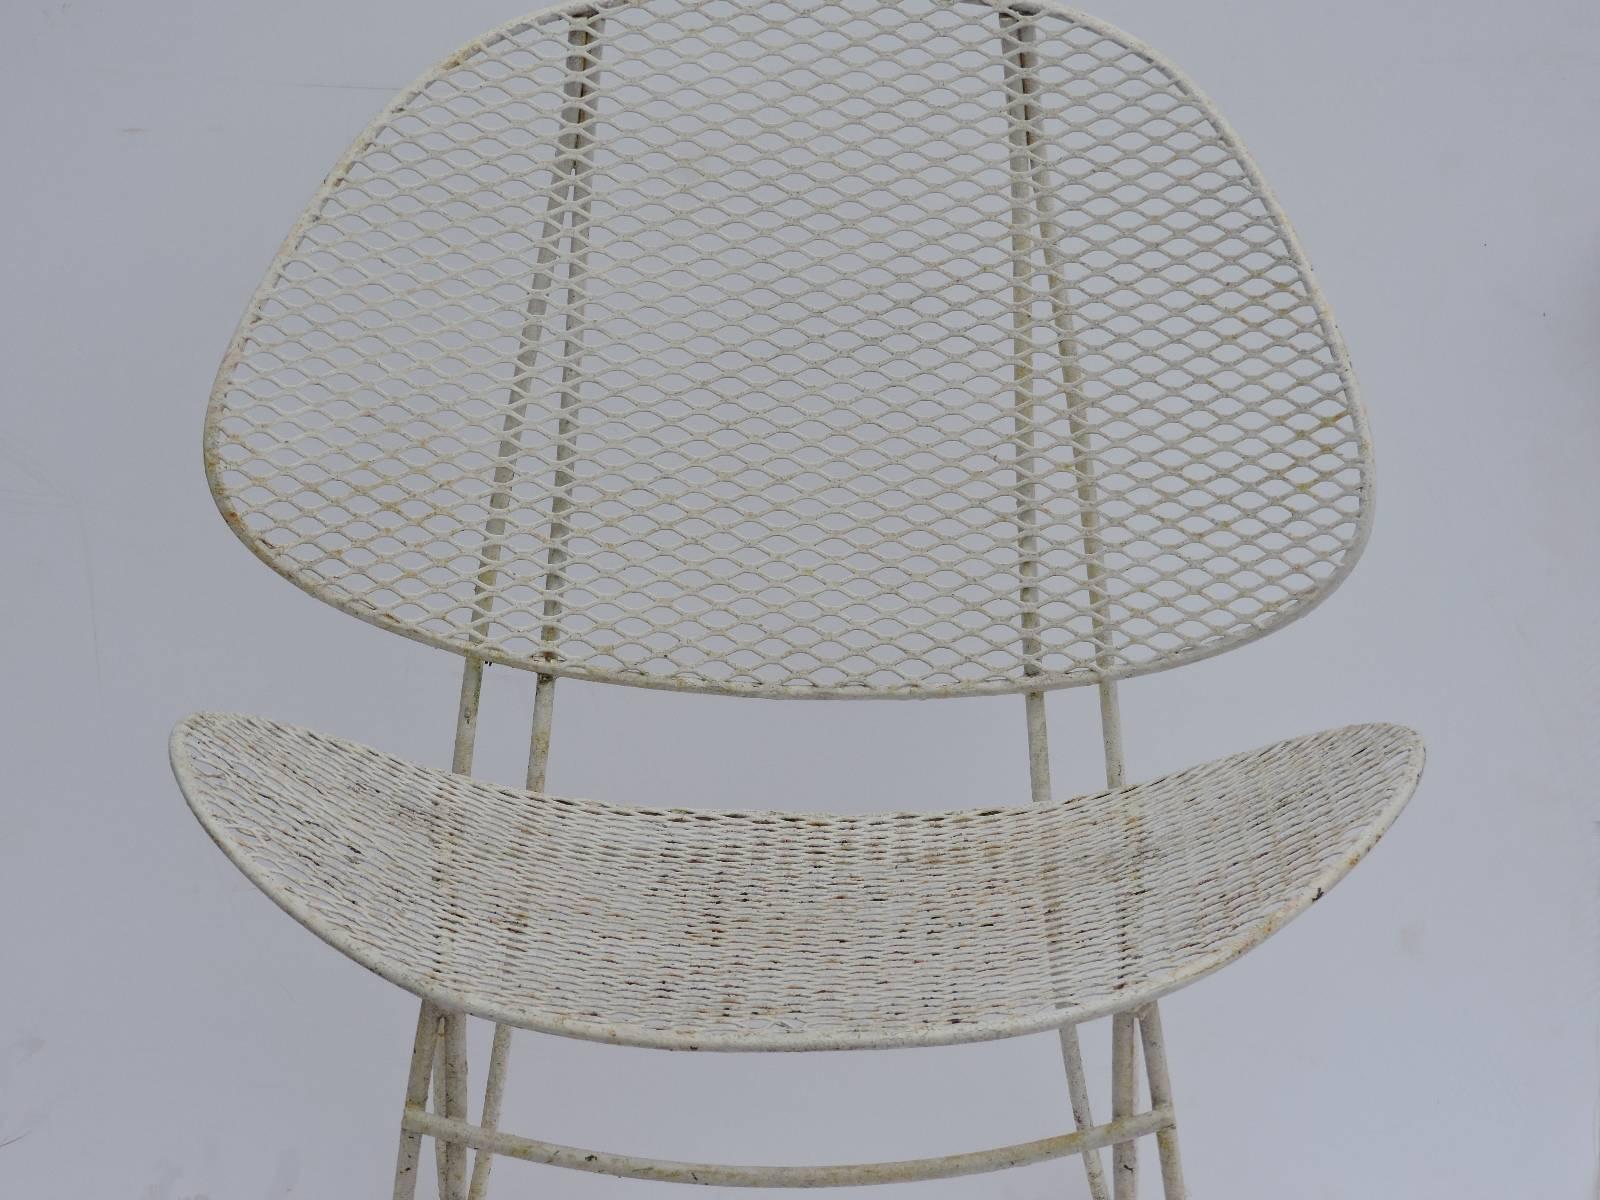 20th Century Modernist Wrought Iron Clam Shell Chairs